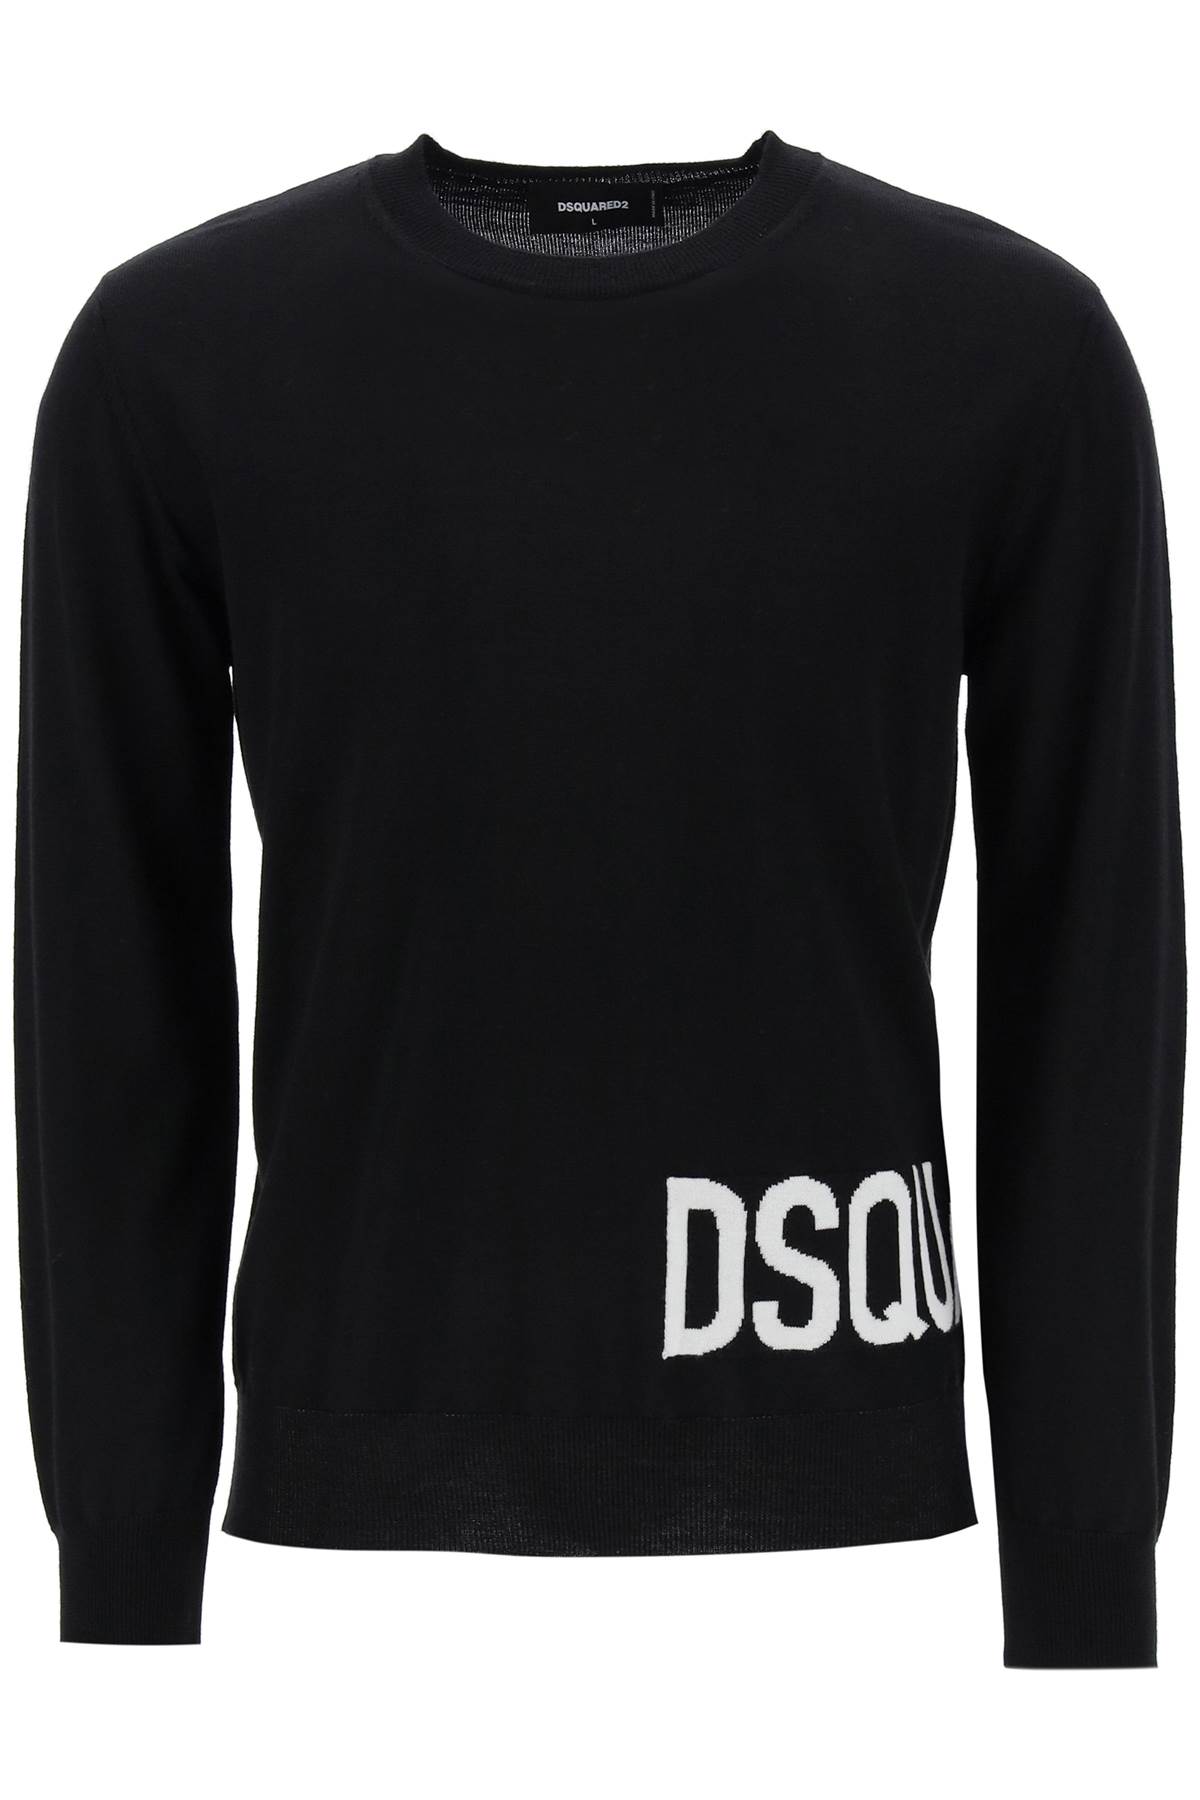 DSQUARED2 SWEATER IN VIRGIN WOOL WITH JACQUARD LOGO